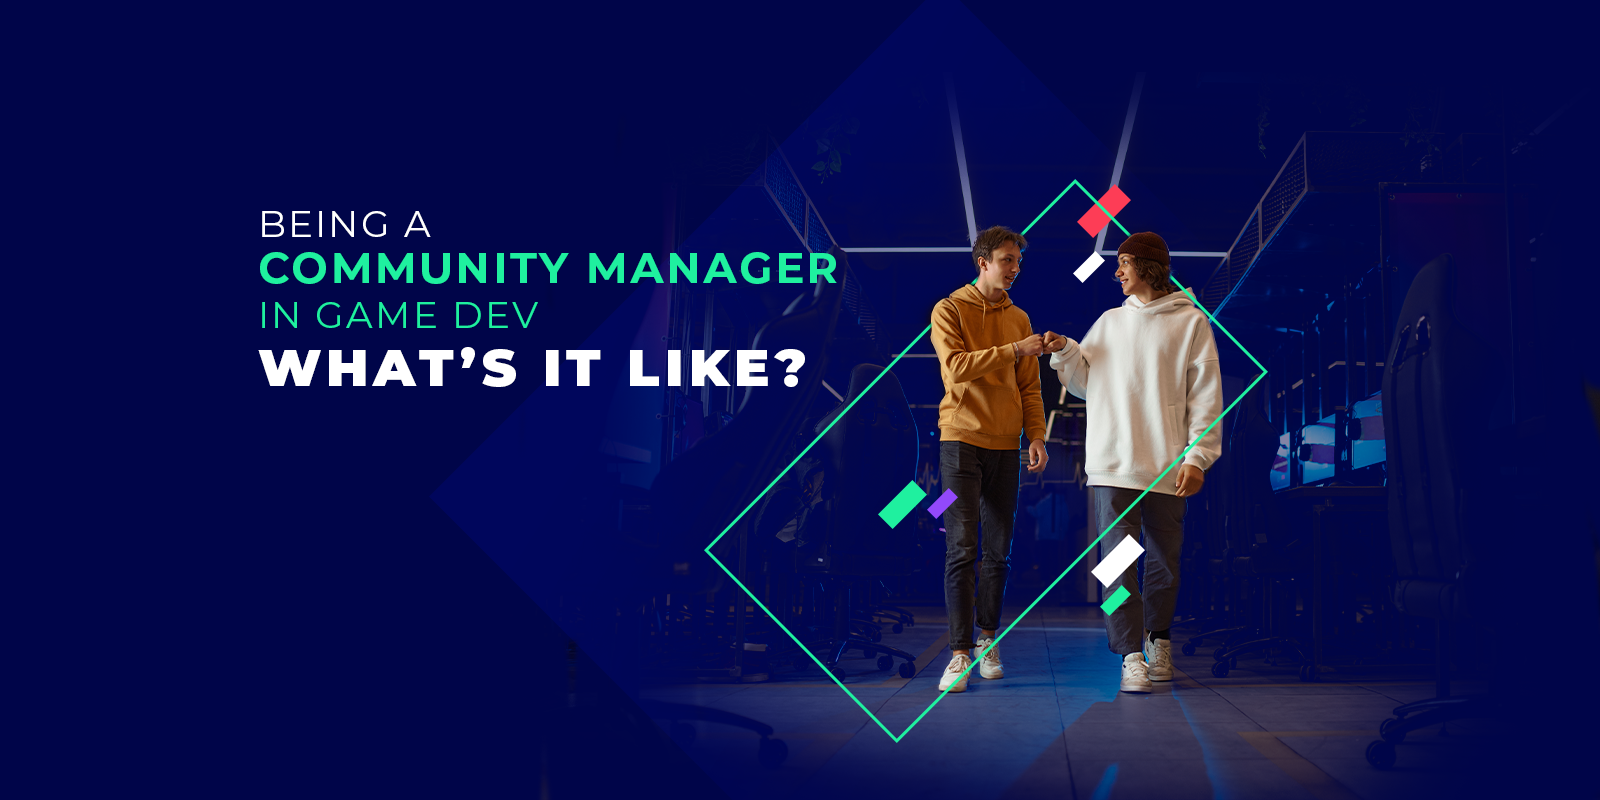 Community Manager what's the job like